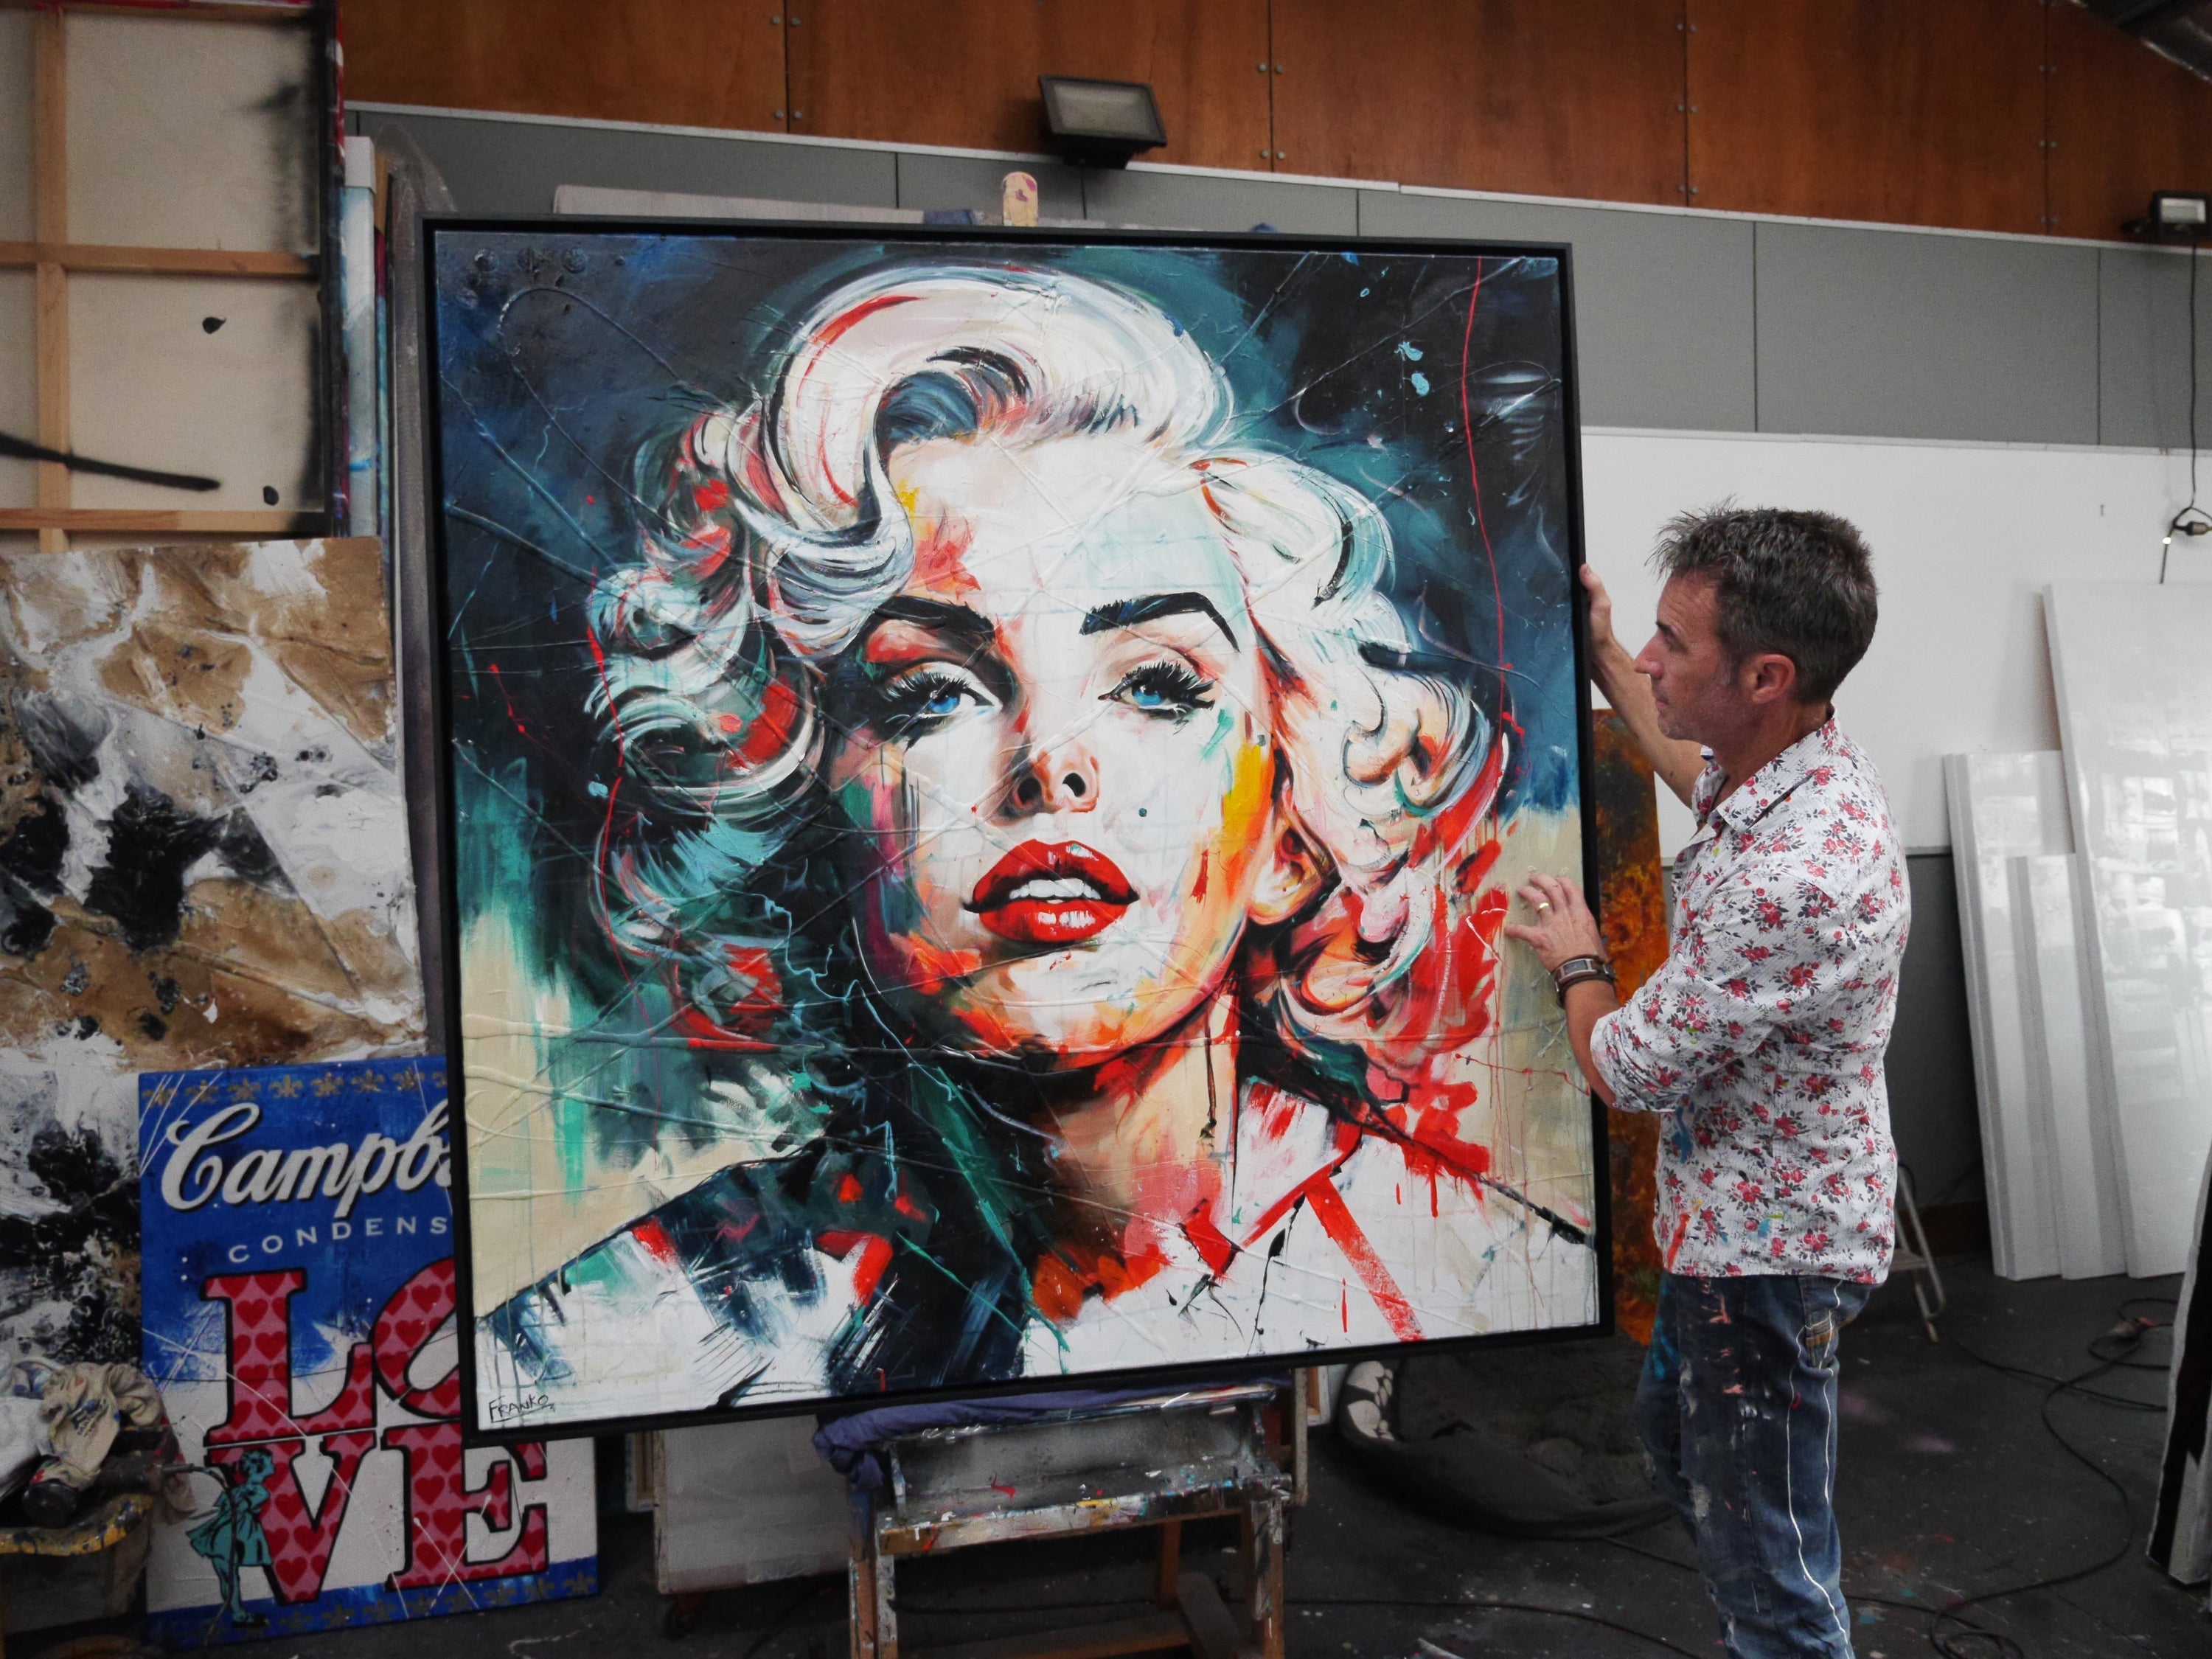 Platinum 150cm x 150cm FRAMED Marilyn Monroe Abstract Realism Textured Painting (SOLD)